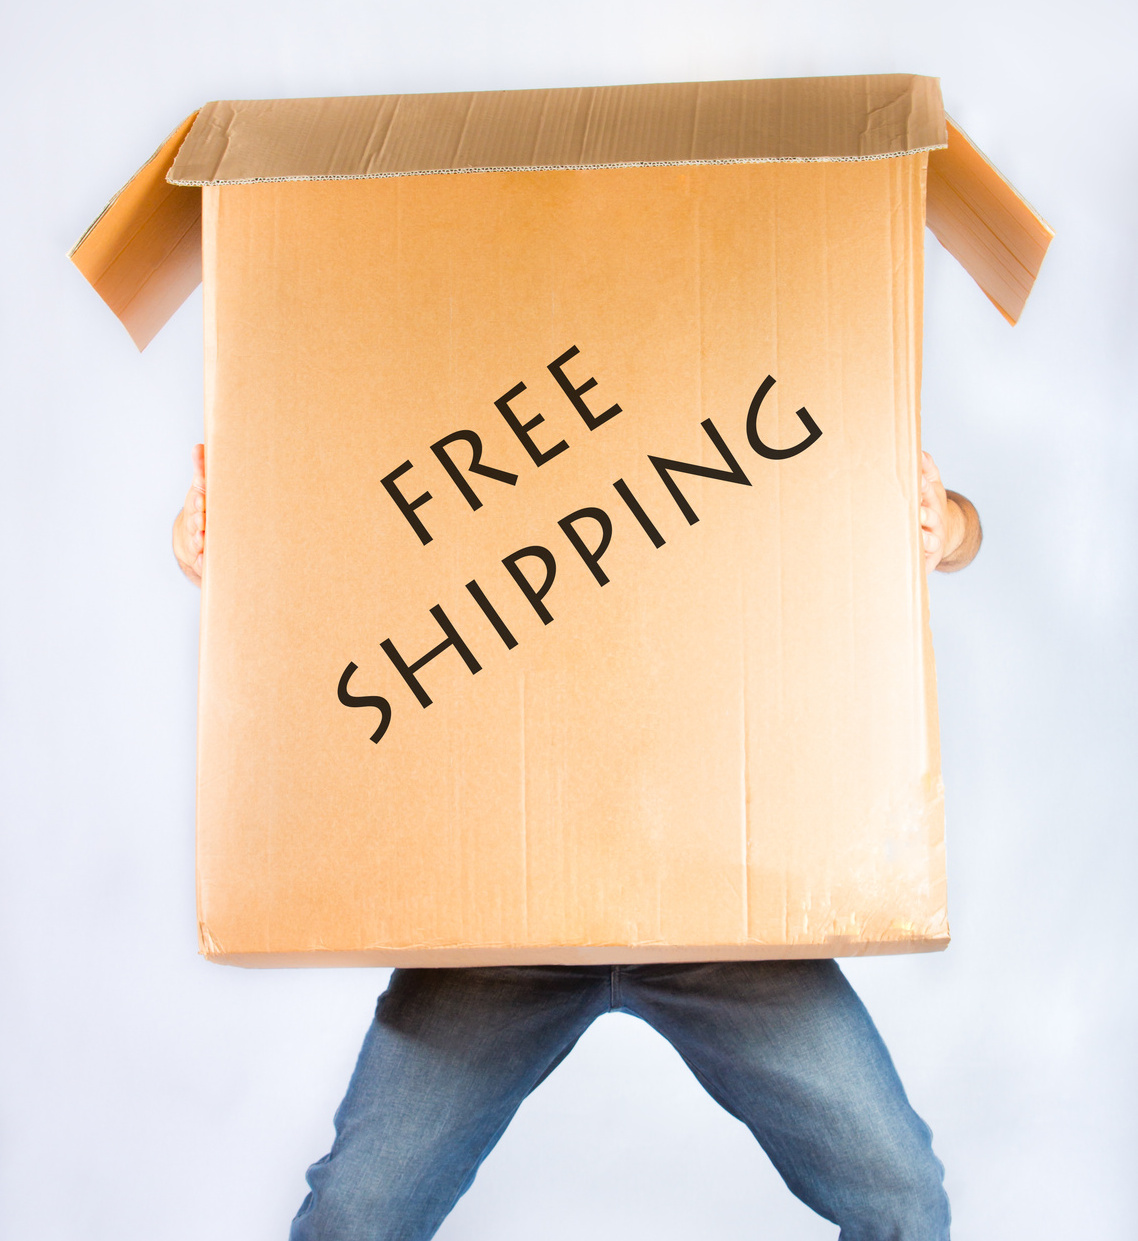 The Dangers of Free Shipping